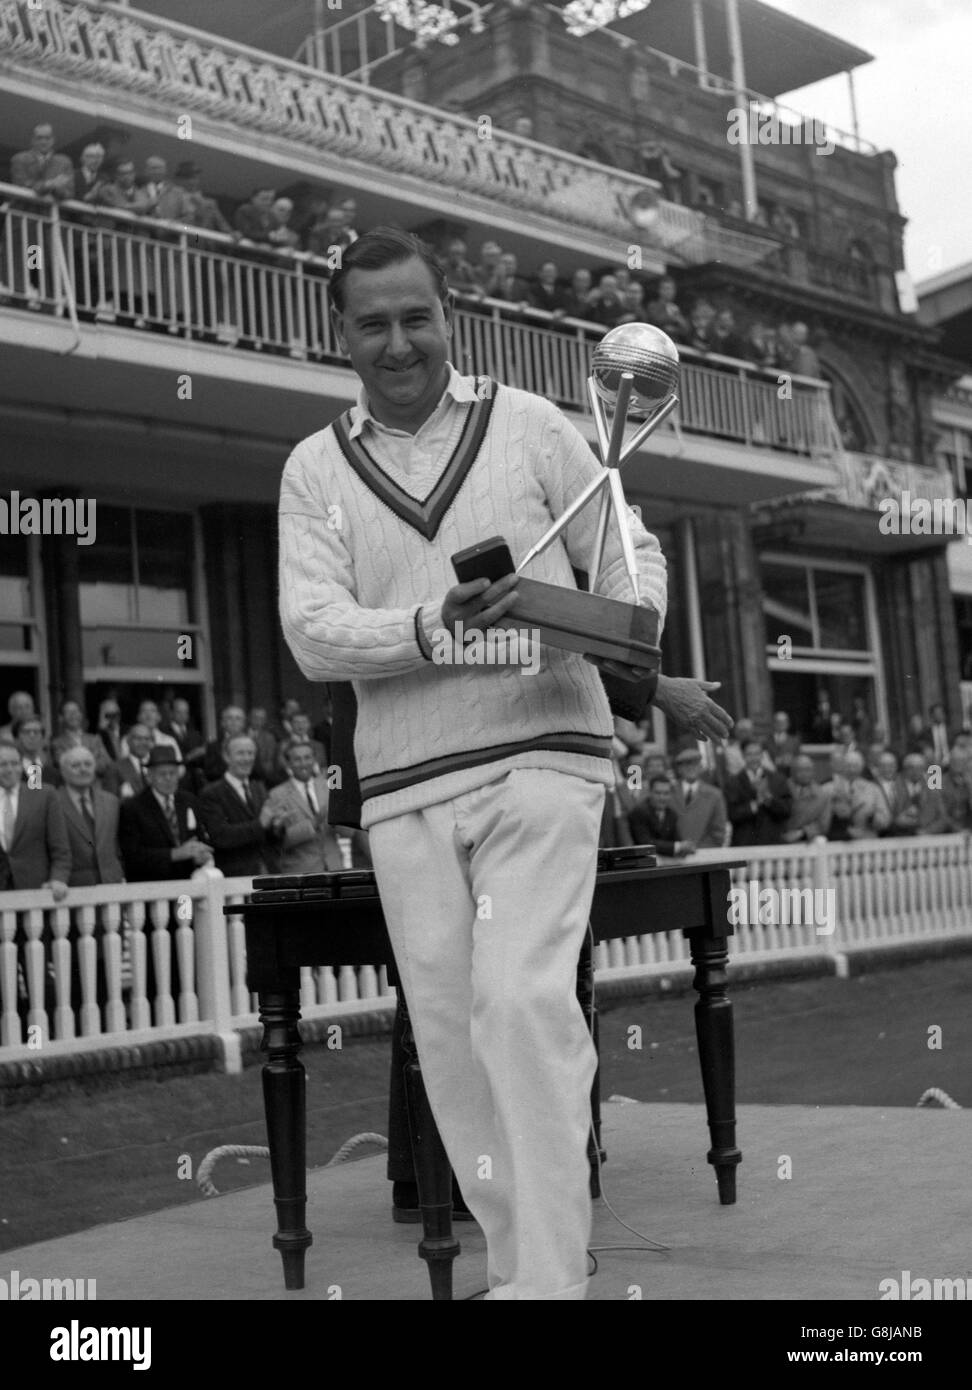 England XI captain Colin Cowdrey with the Rothman's World Cup trophy following England XI's victory over the West Indies at Lord's. Stock Photo